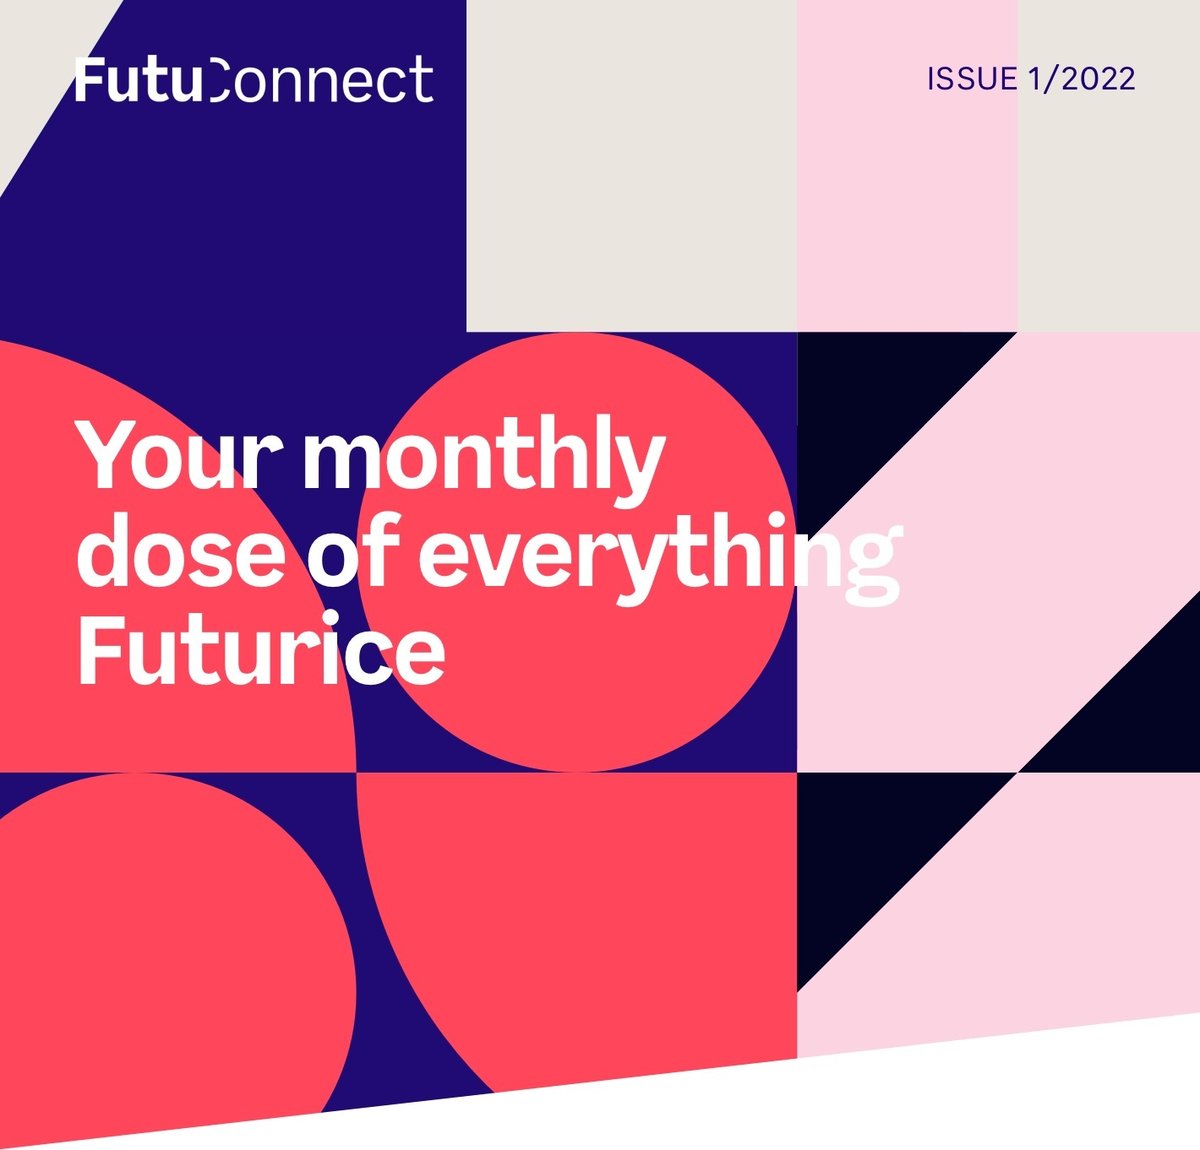 FutuConnect Newsletter Issue 1/2022